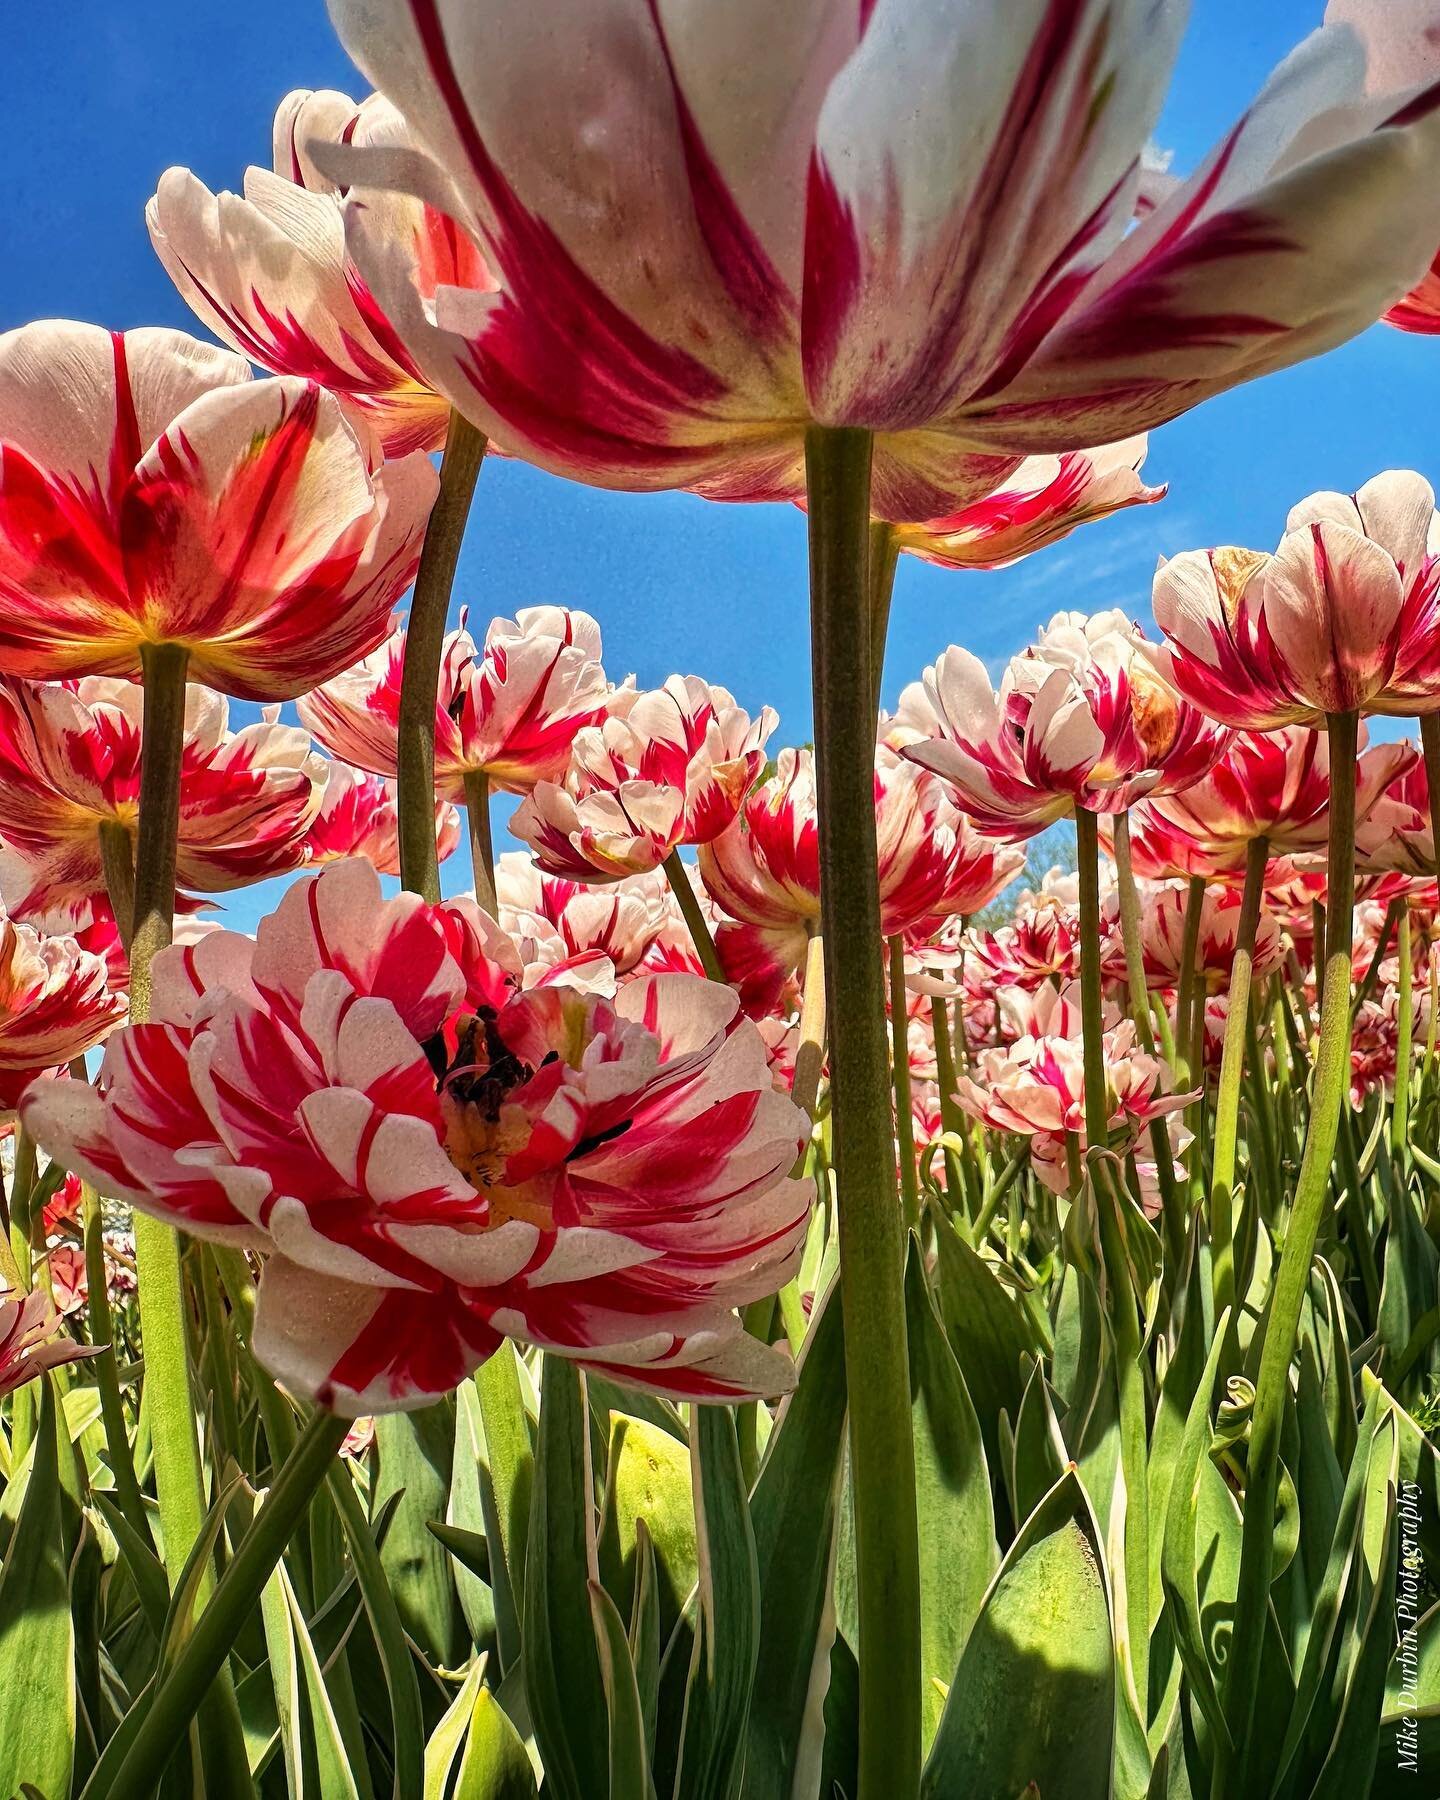 A shot from today at Veldheer&rsquo;s Tulip Farm that made me happy. The farm is in Holland, Michigan and they plant some 5 million tulip bulbs each year. Well worth the trip to see. 

#TulipTime
#hollandmichigan 
#veldheertulipfarm 
#puremichigan 
#